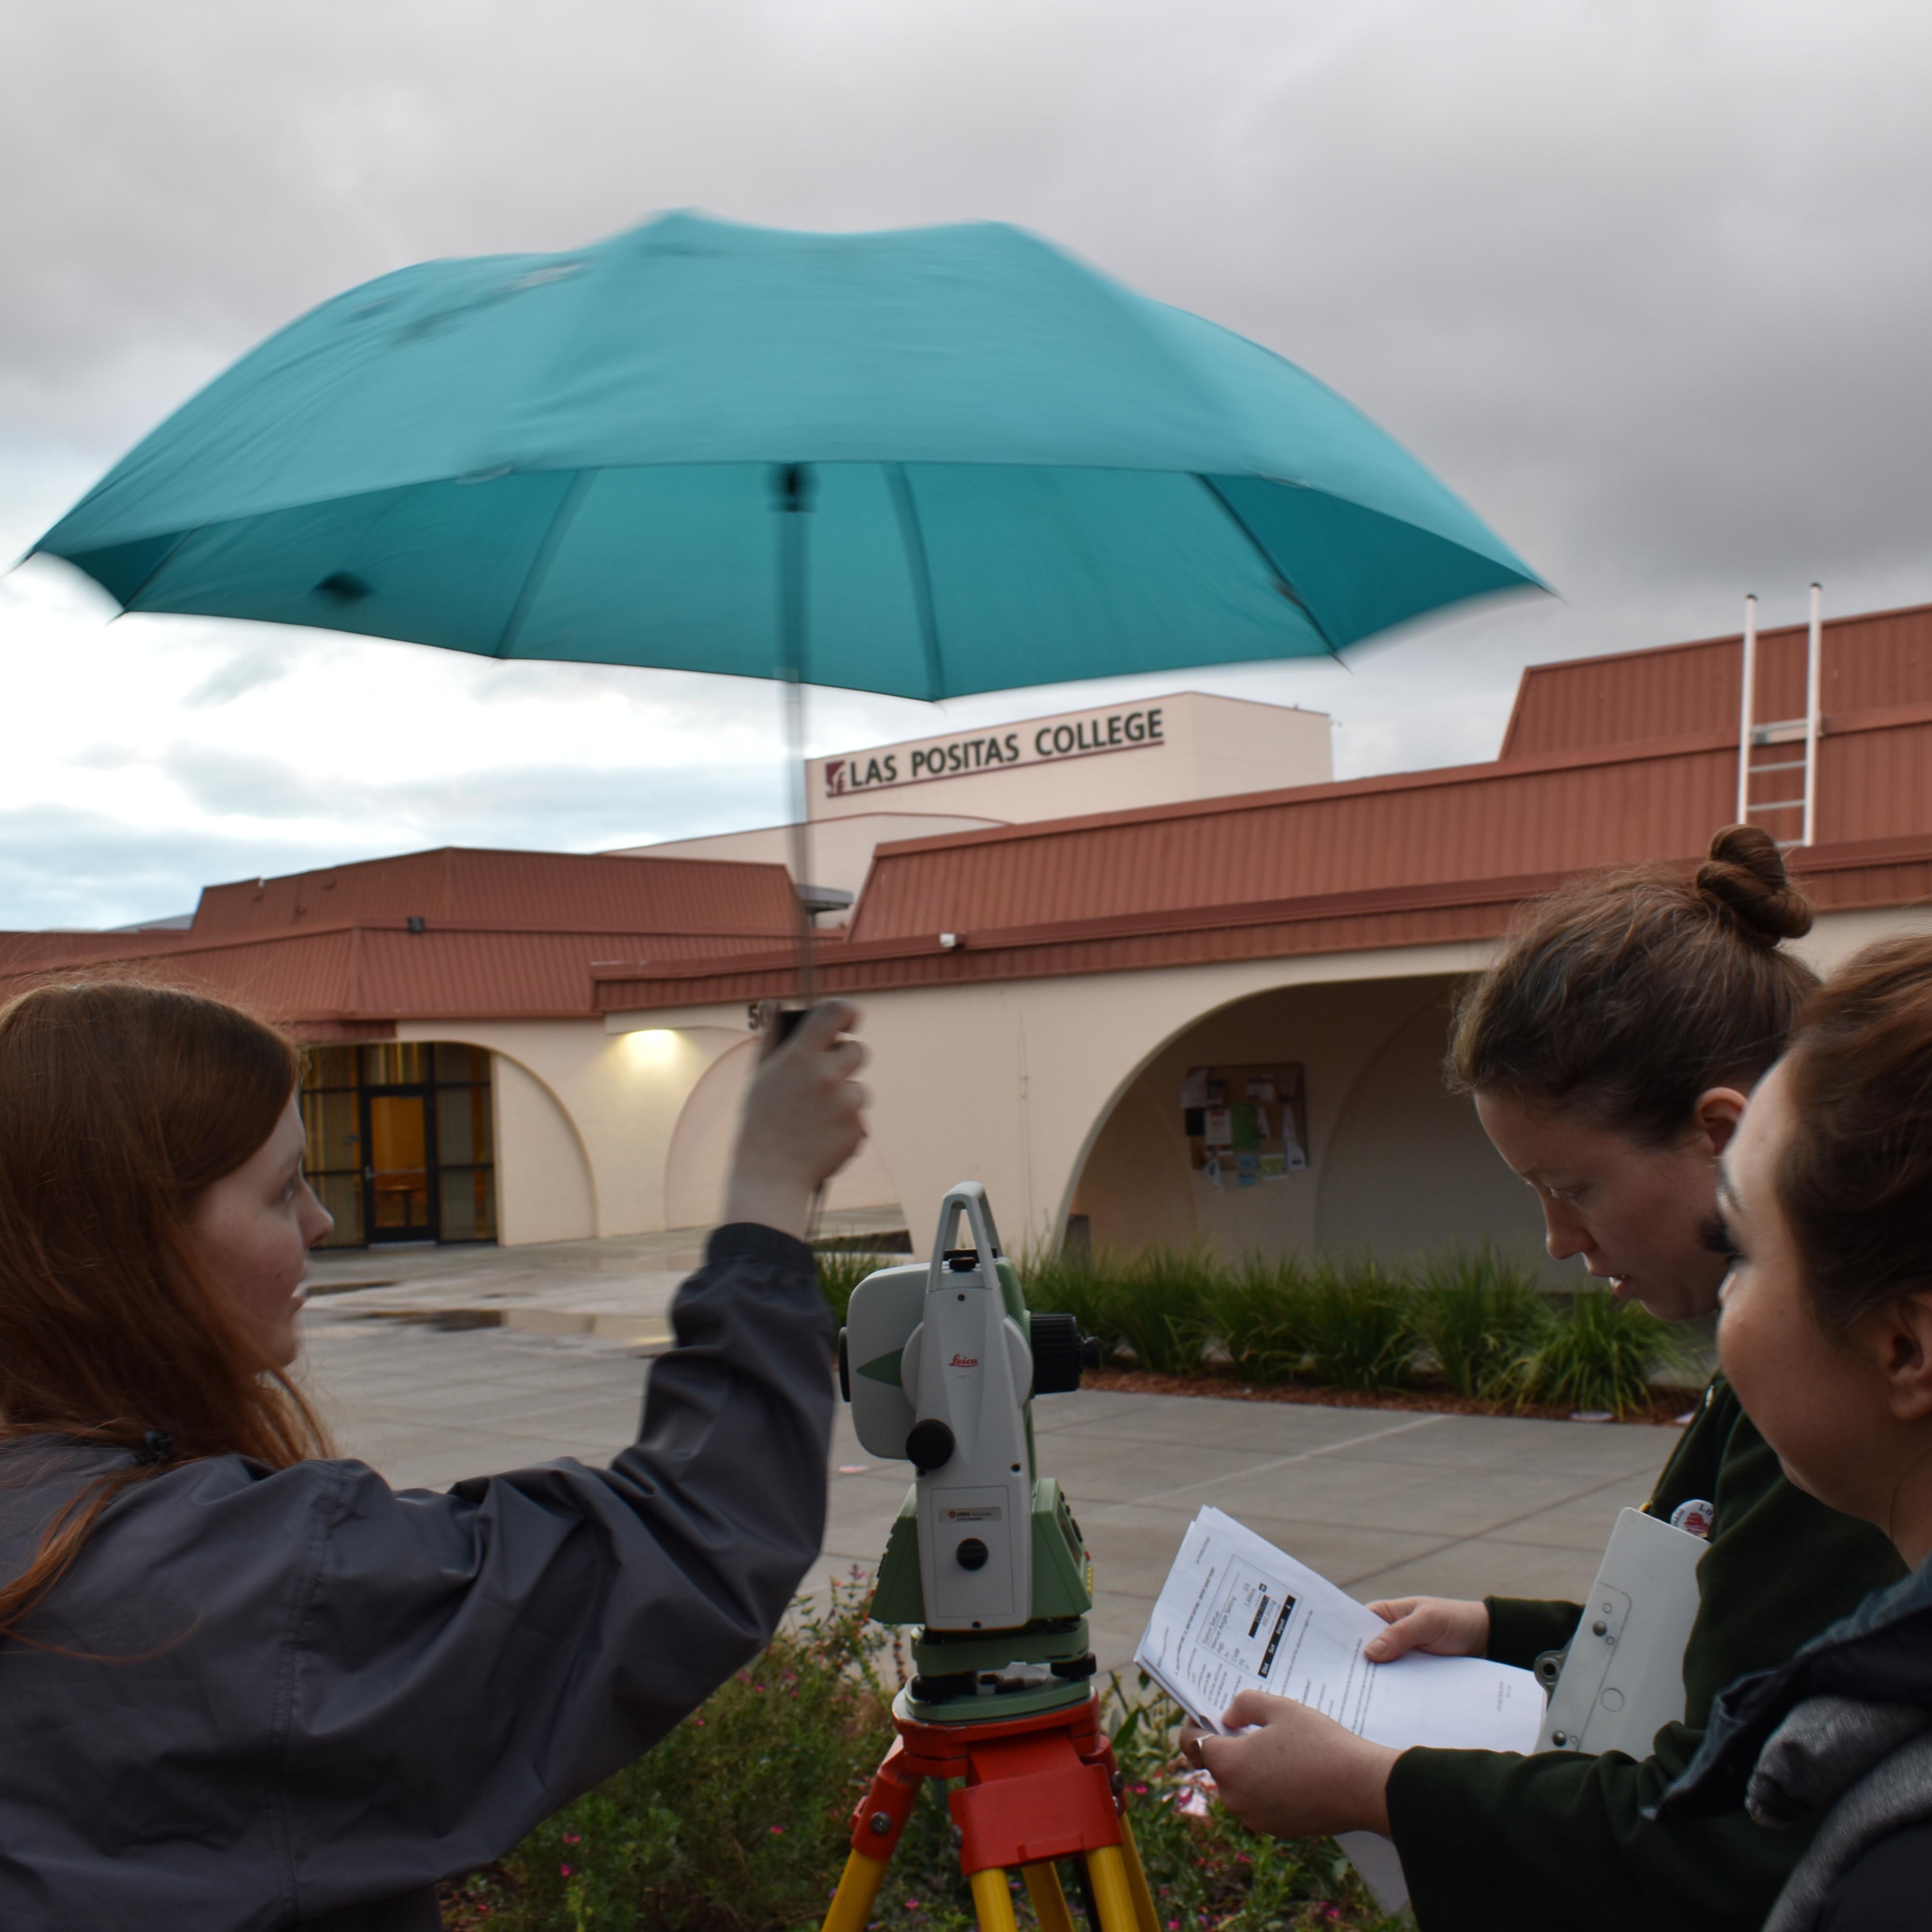 Using a laser theotolite in the rain